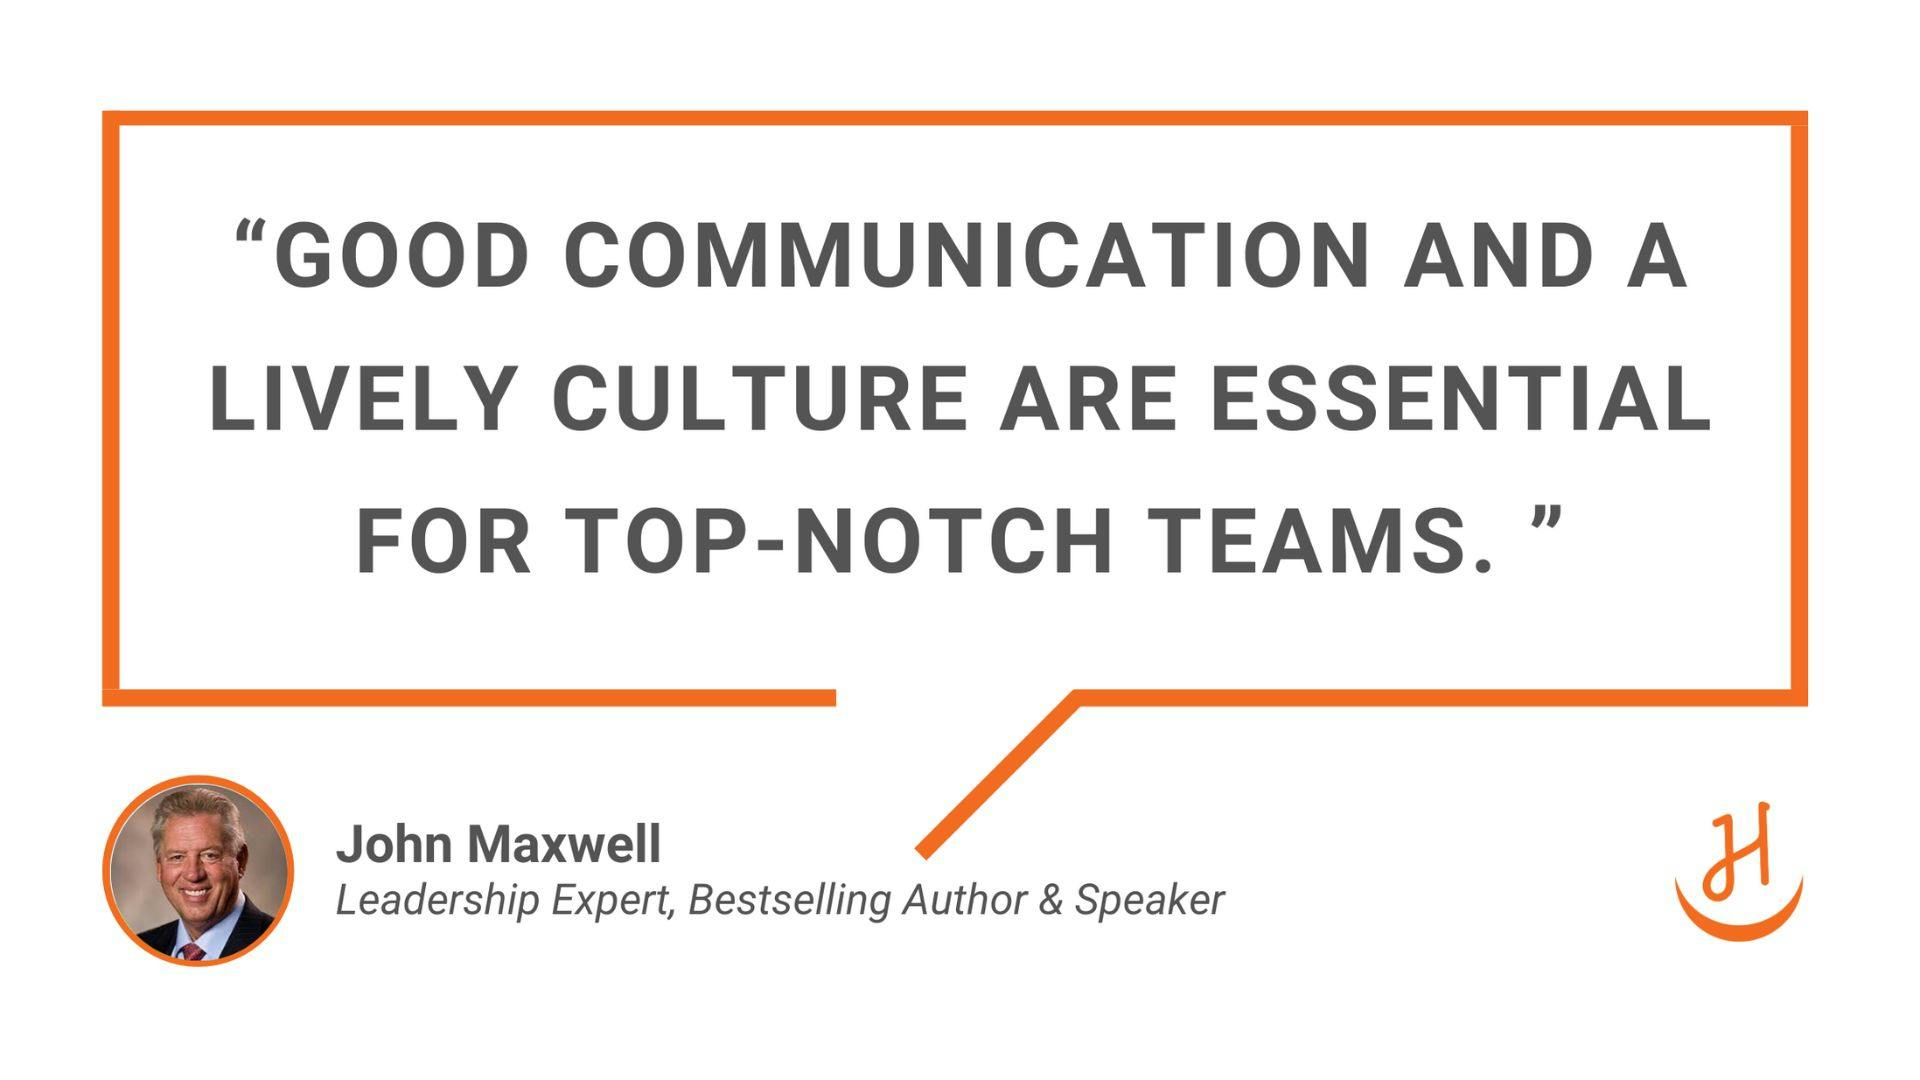 "Good communication and lively culture are essential for top-notch teams." Quote by John Maxwell, Leadership expert, bestselling author and speaker.